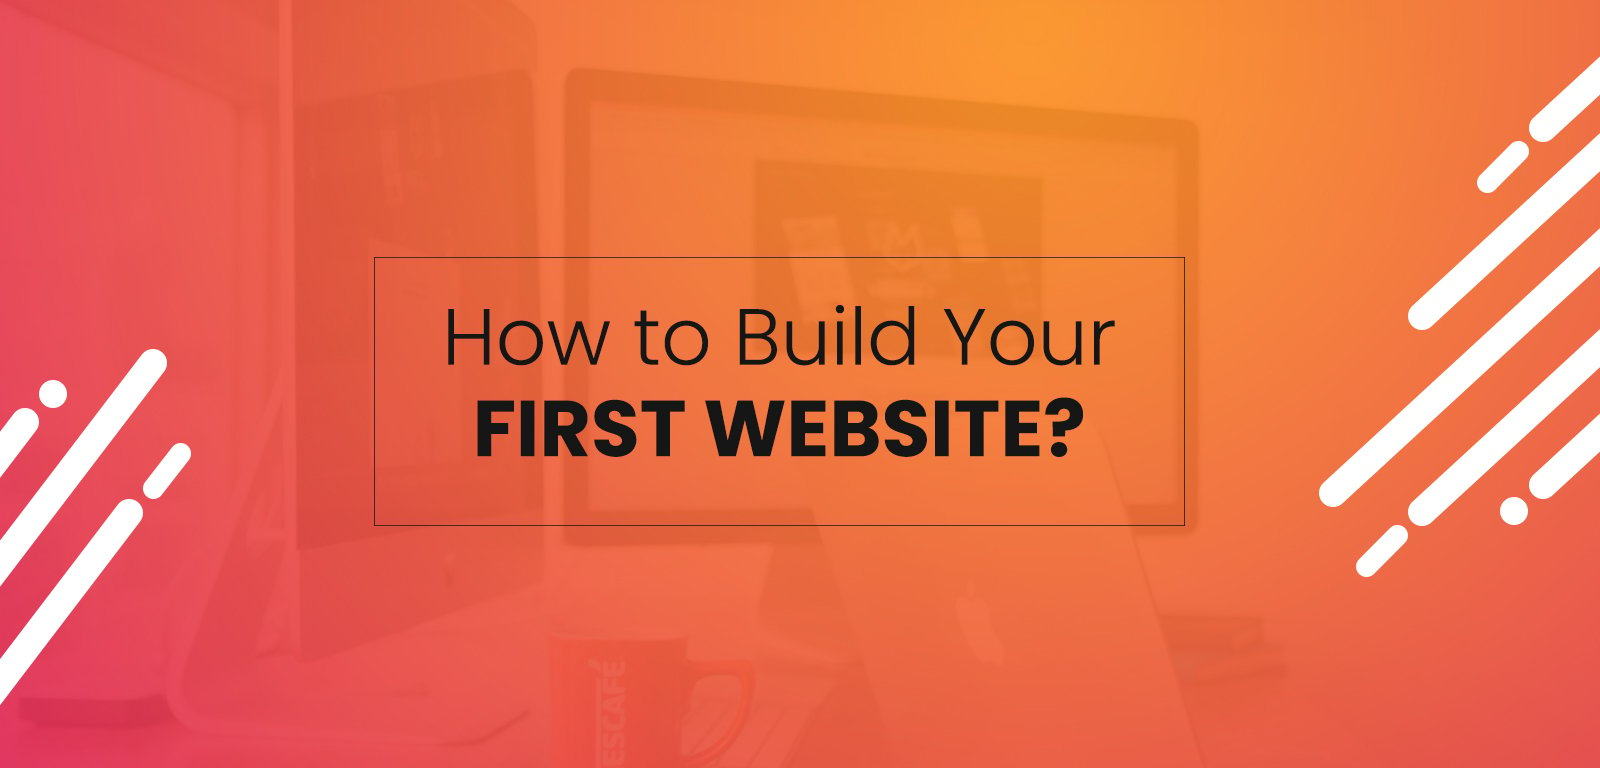 How to build your first website?